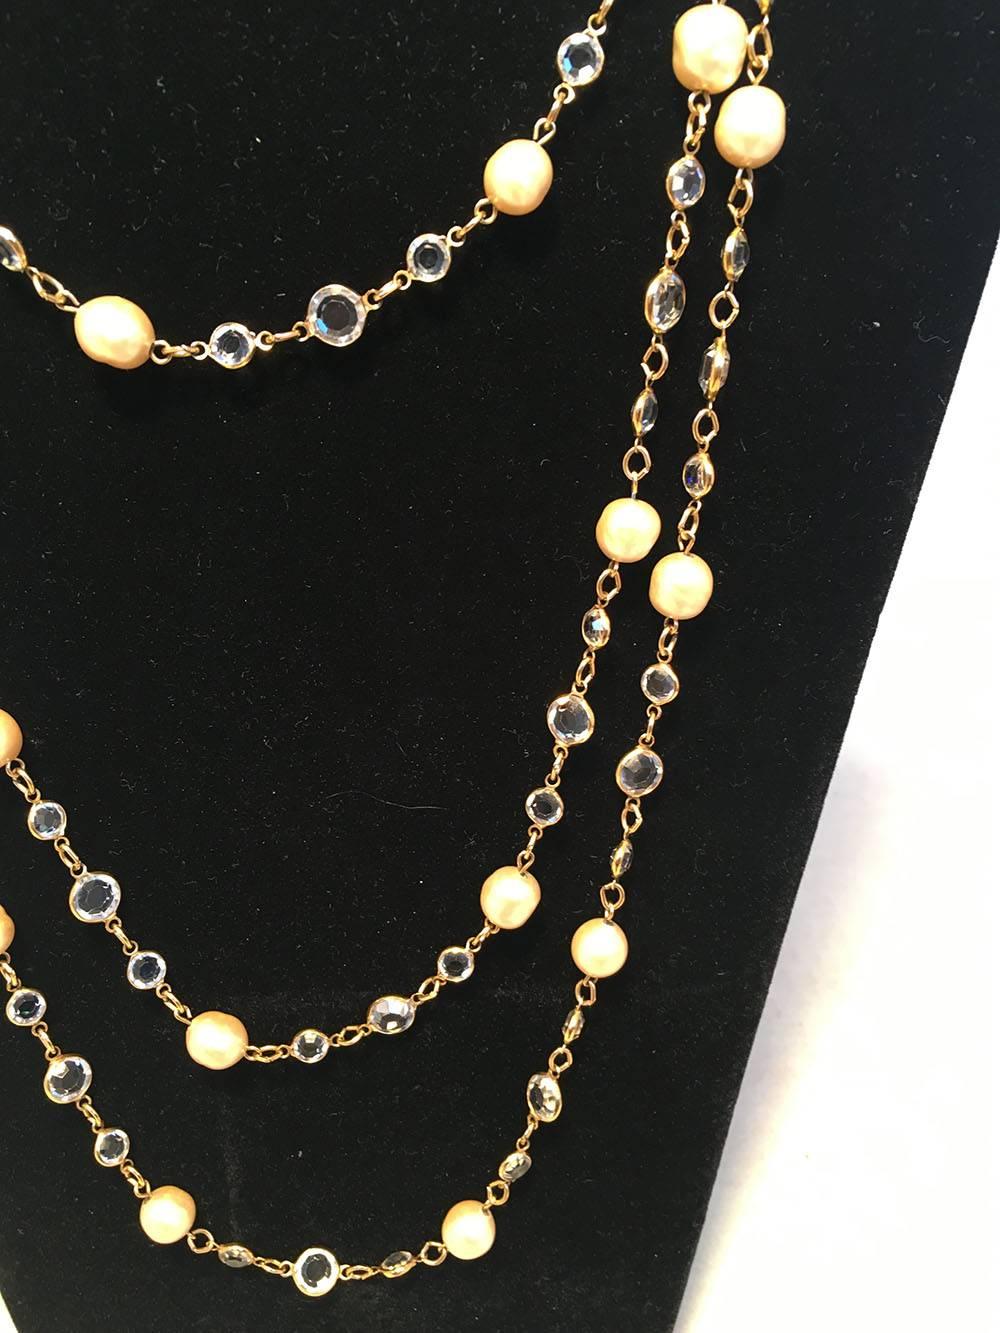 BEAUTIFUL Chanel Vintage Pearl and Clear Crystal Chicklet Long Necklace in excellent condition.  Clear crystal round chicklet style beads with natural shaped oval 1/2